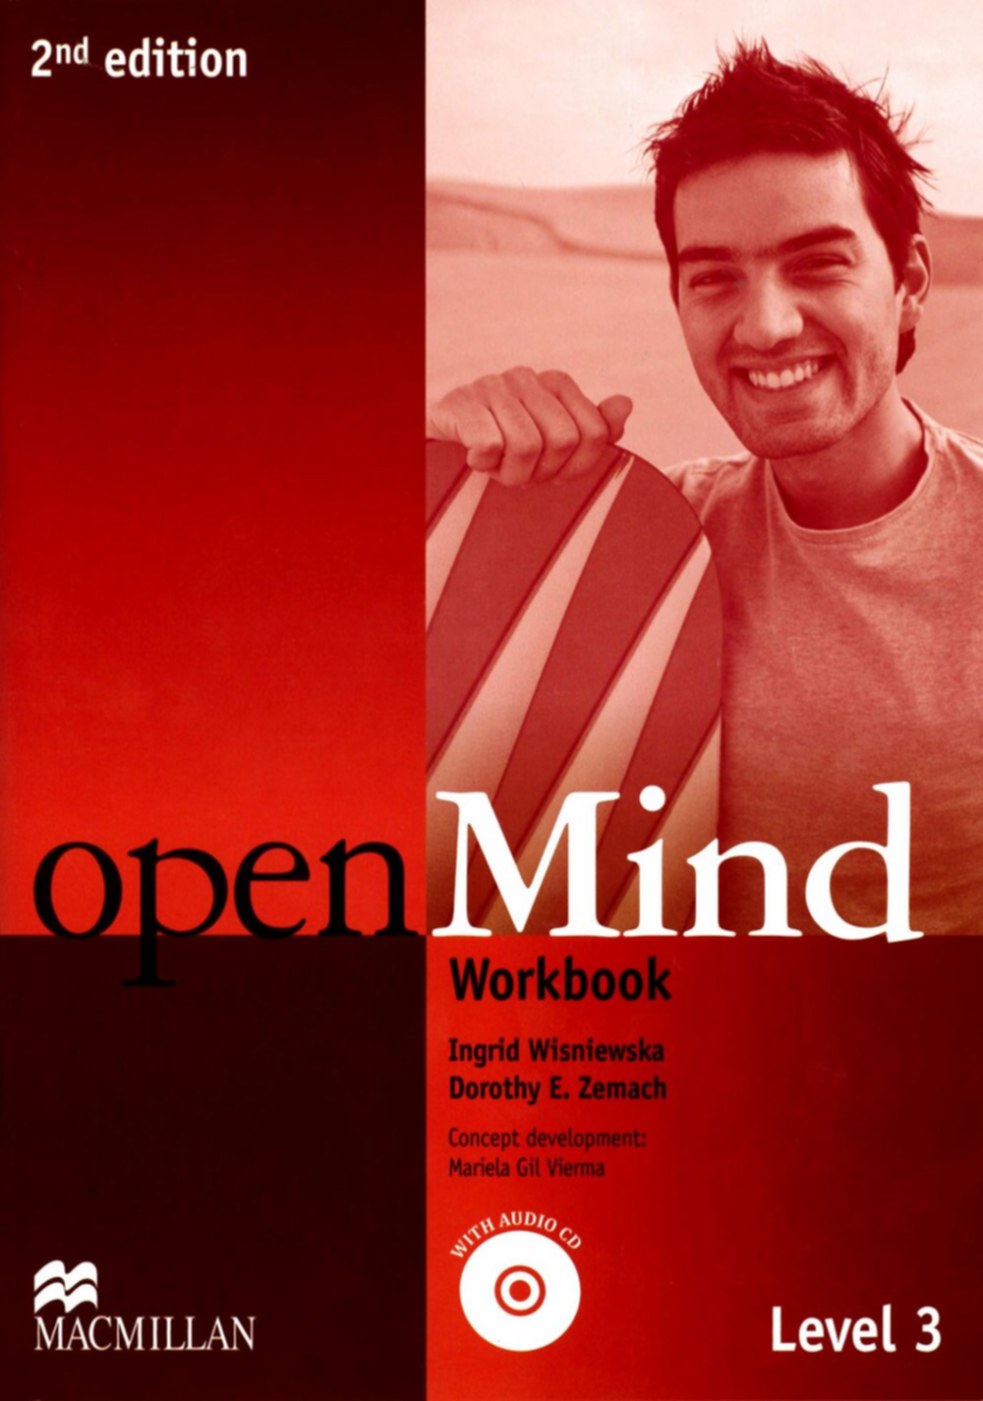 Open Mind 2/e (3) WB with Audio CD/1片 (without Key)